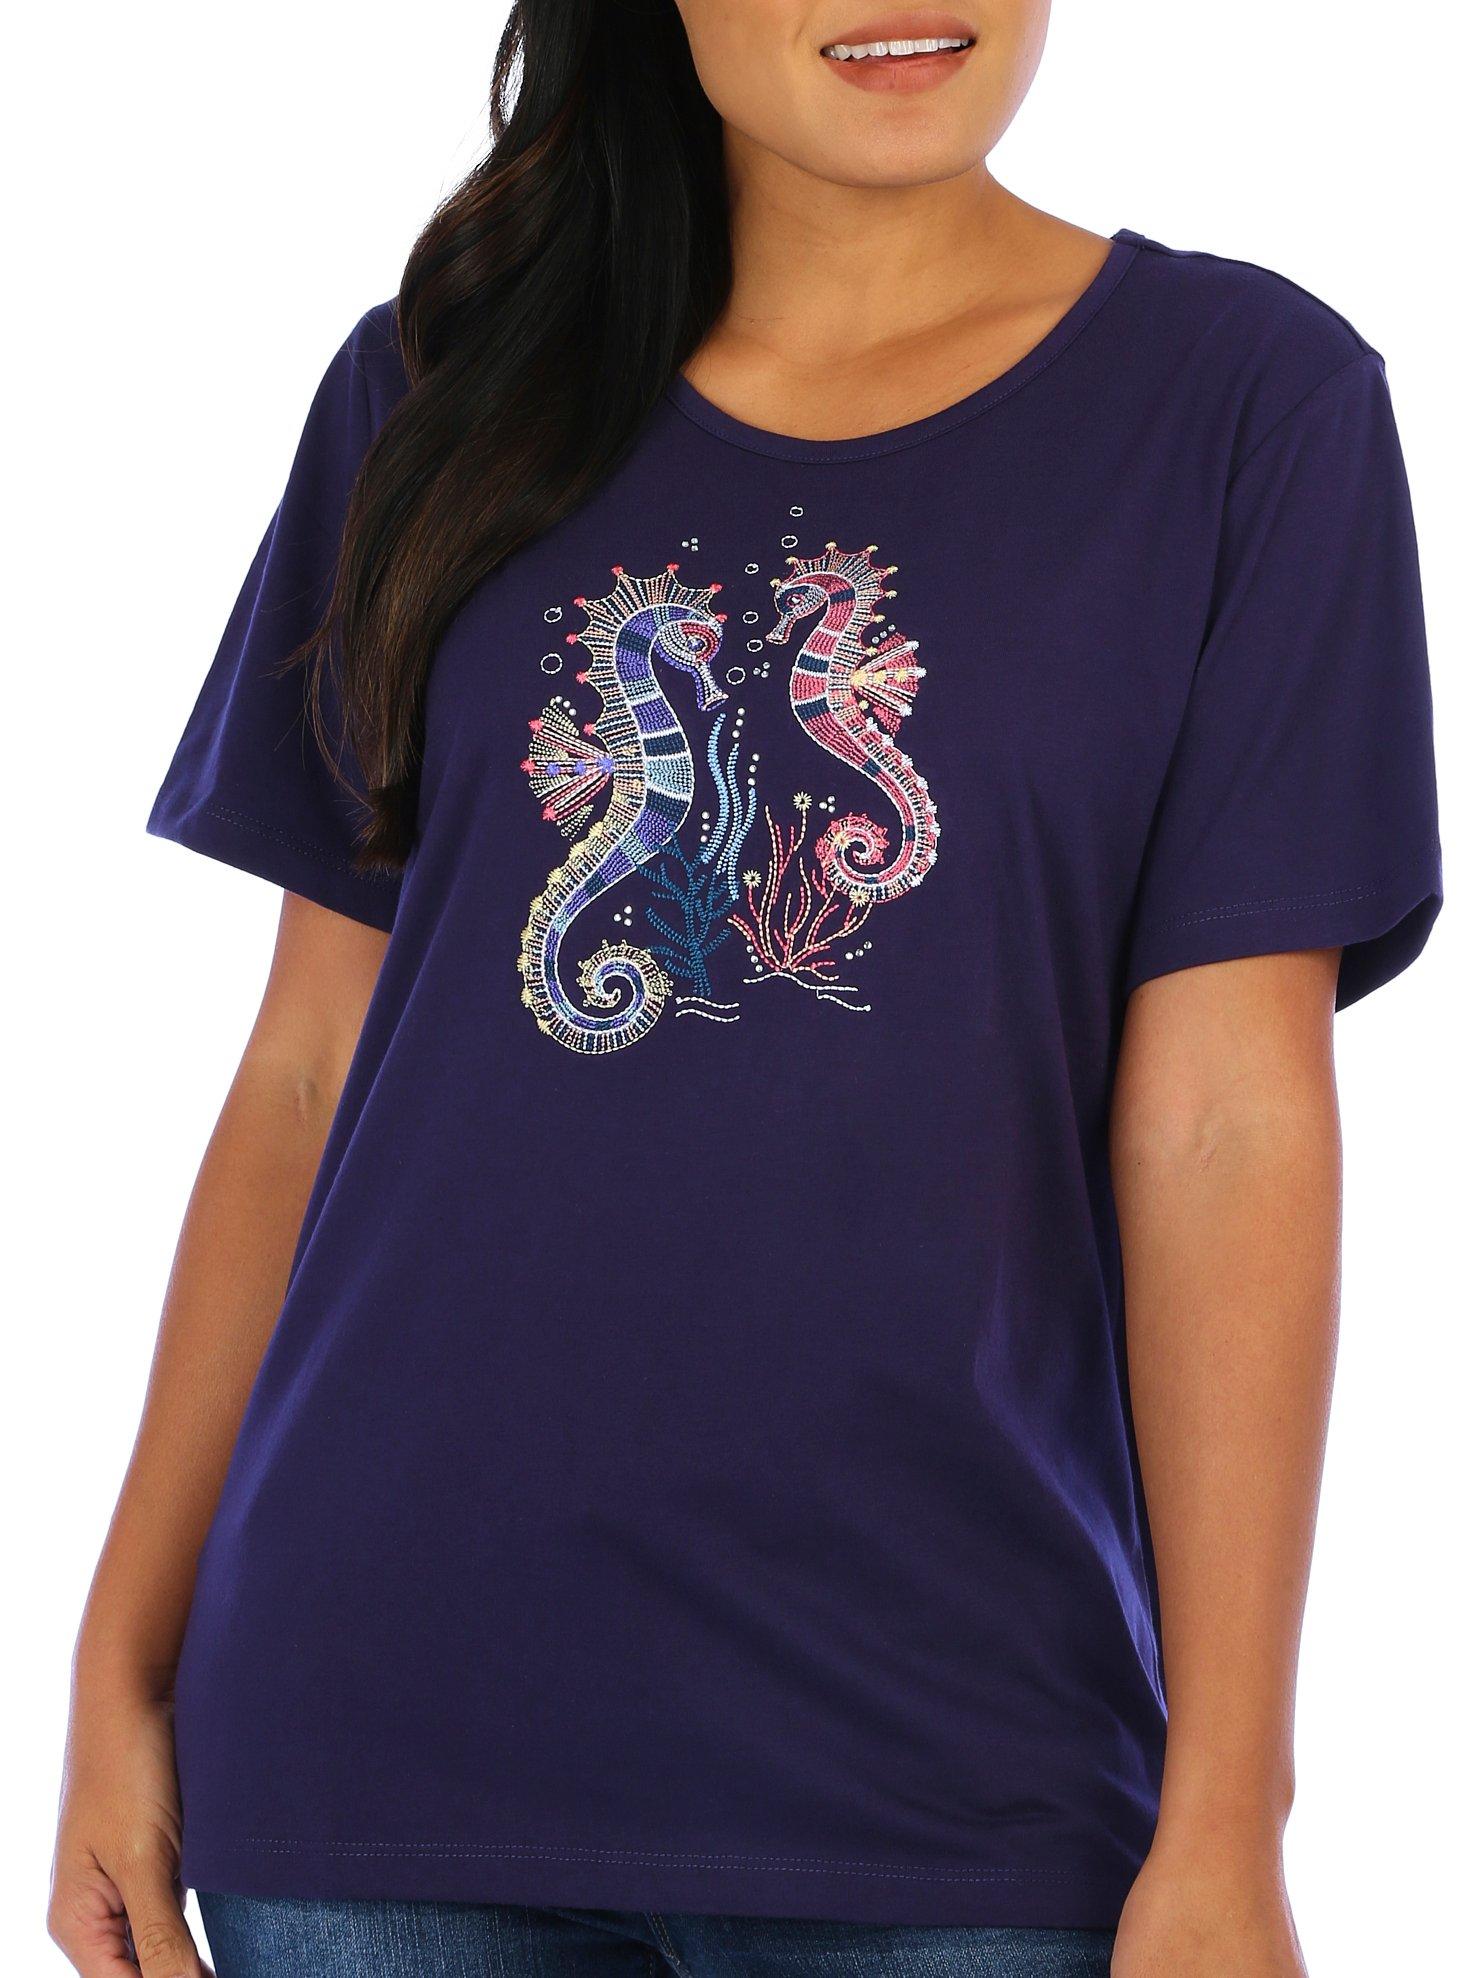 Coral Bay Womens Embroidered Seahorses Short Sleeve Top